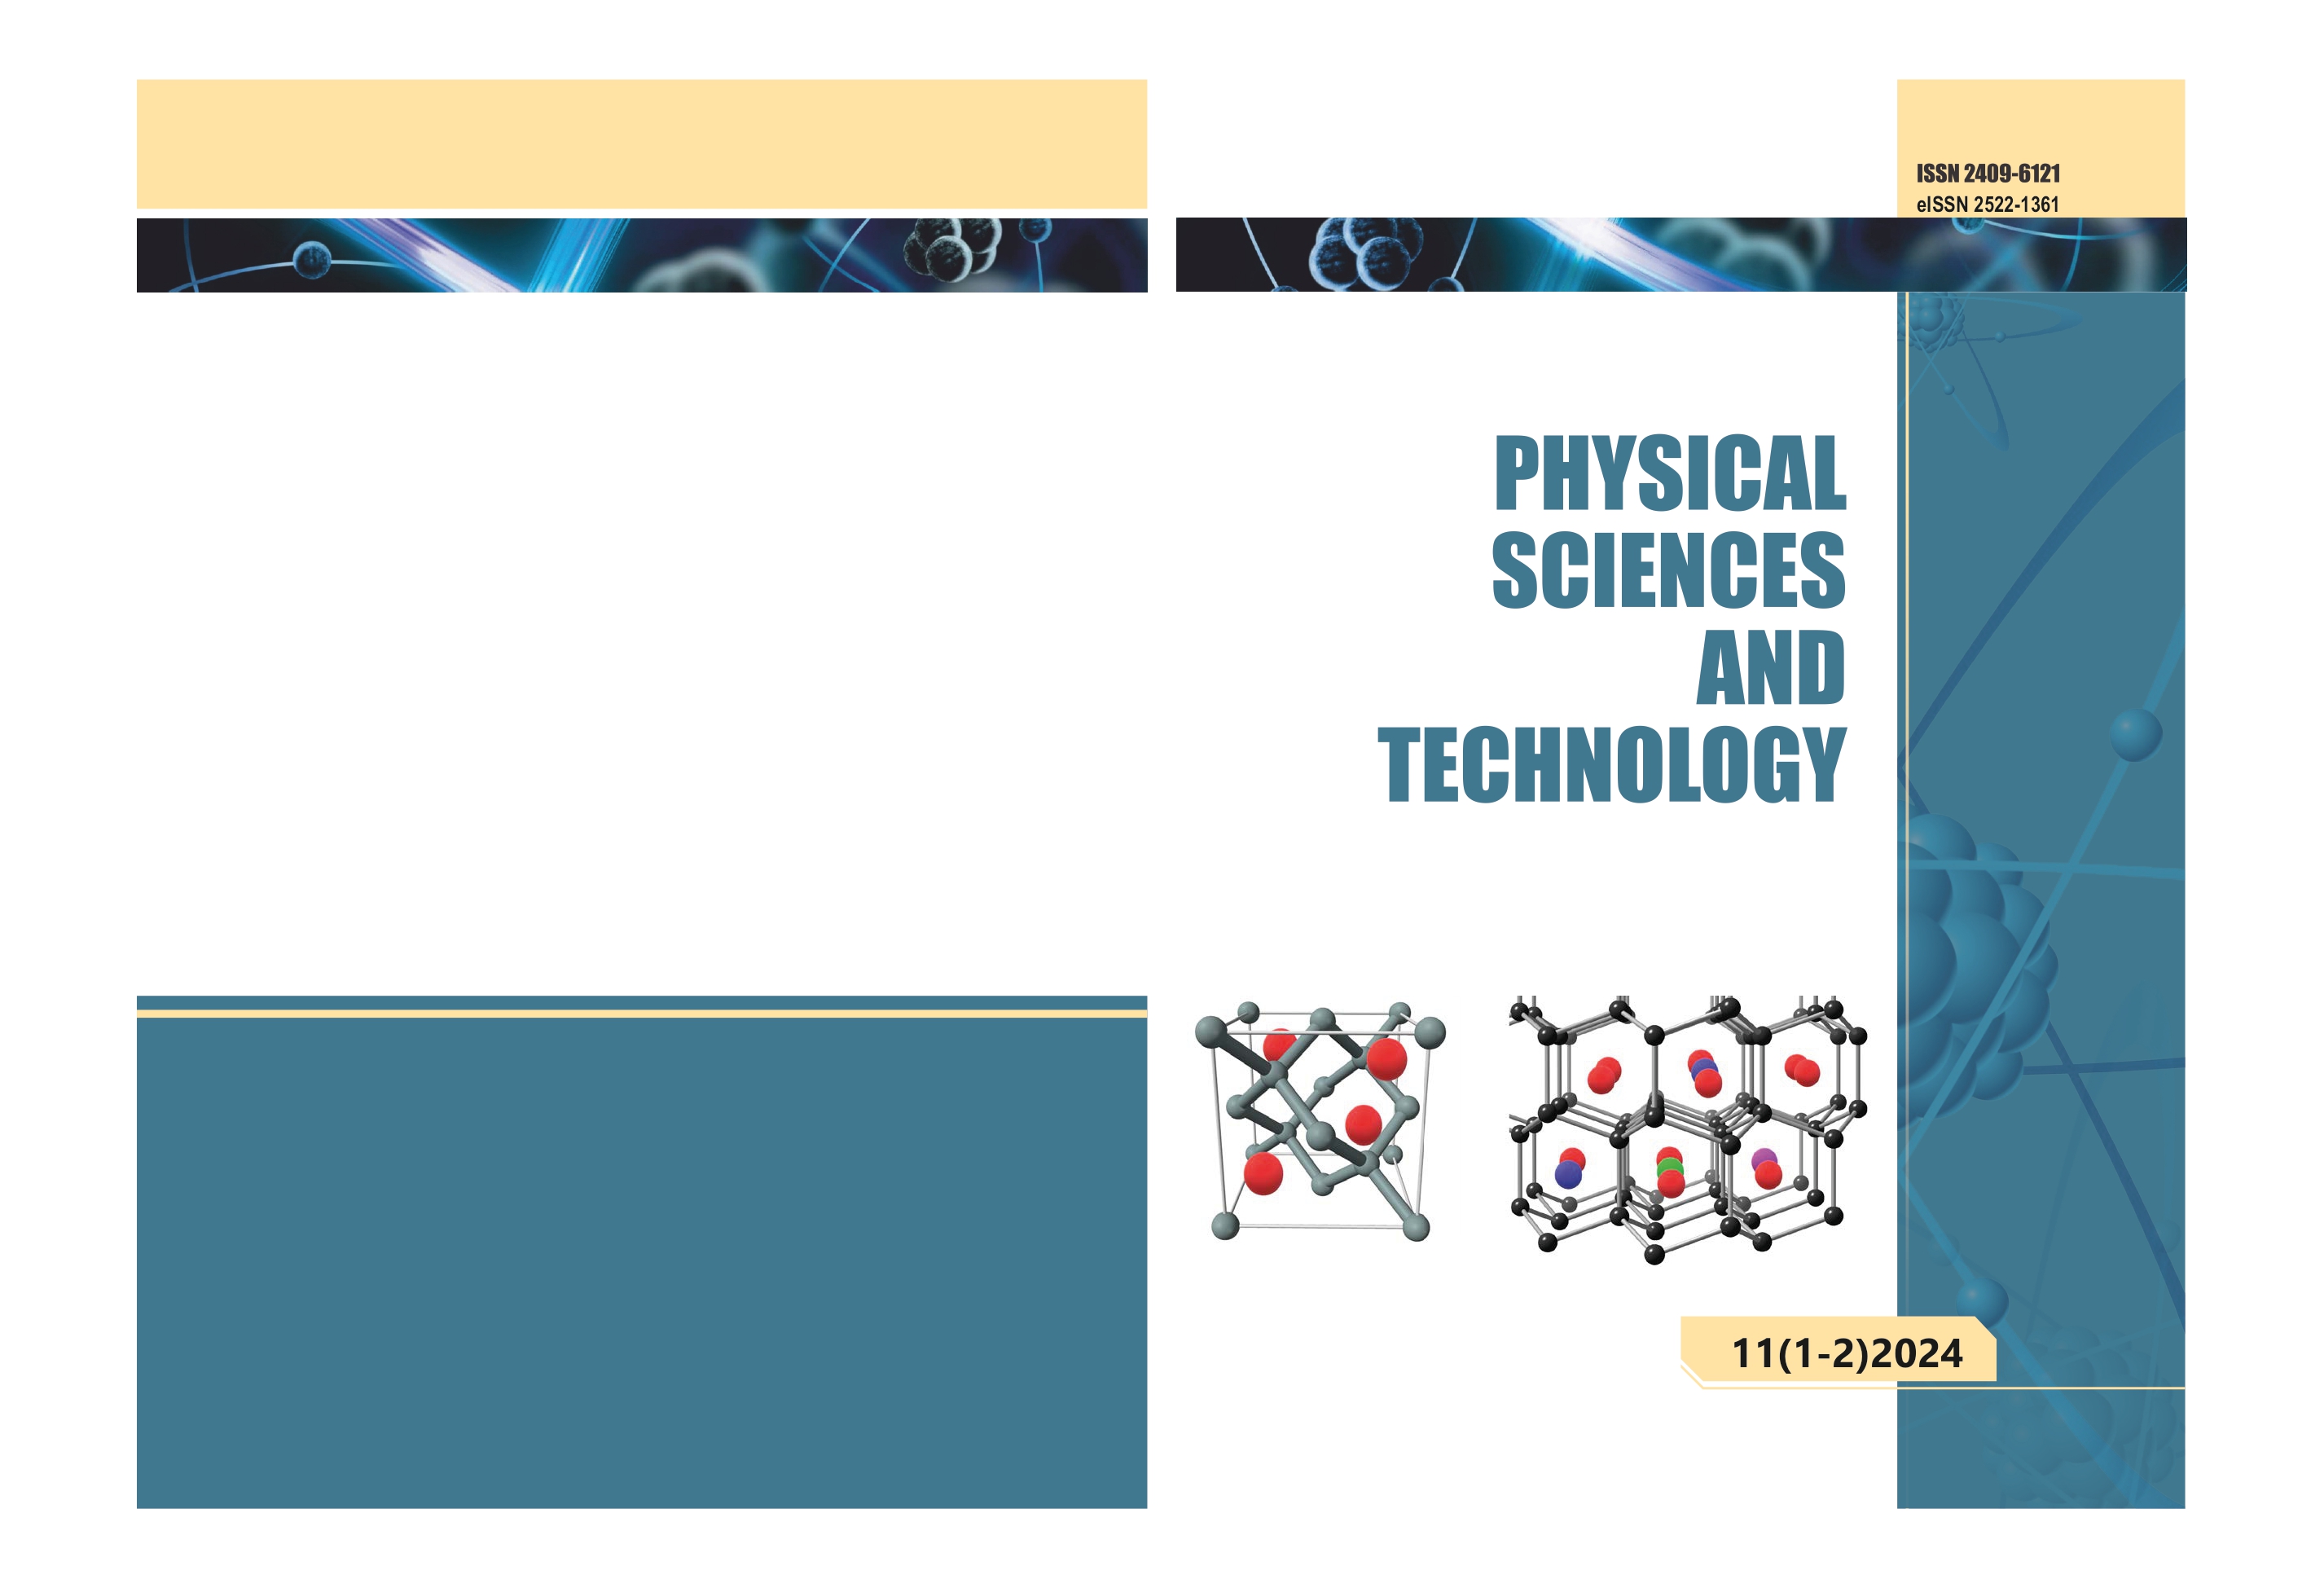 					View Vol. 11 No. 1-2 (2024): PHYSICAL SCIENCES AND TECHNOLOGY
				